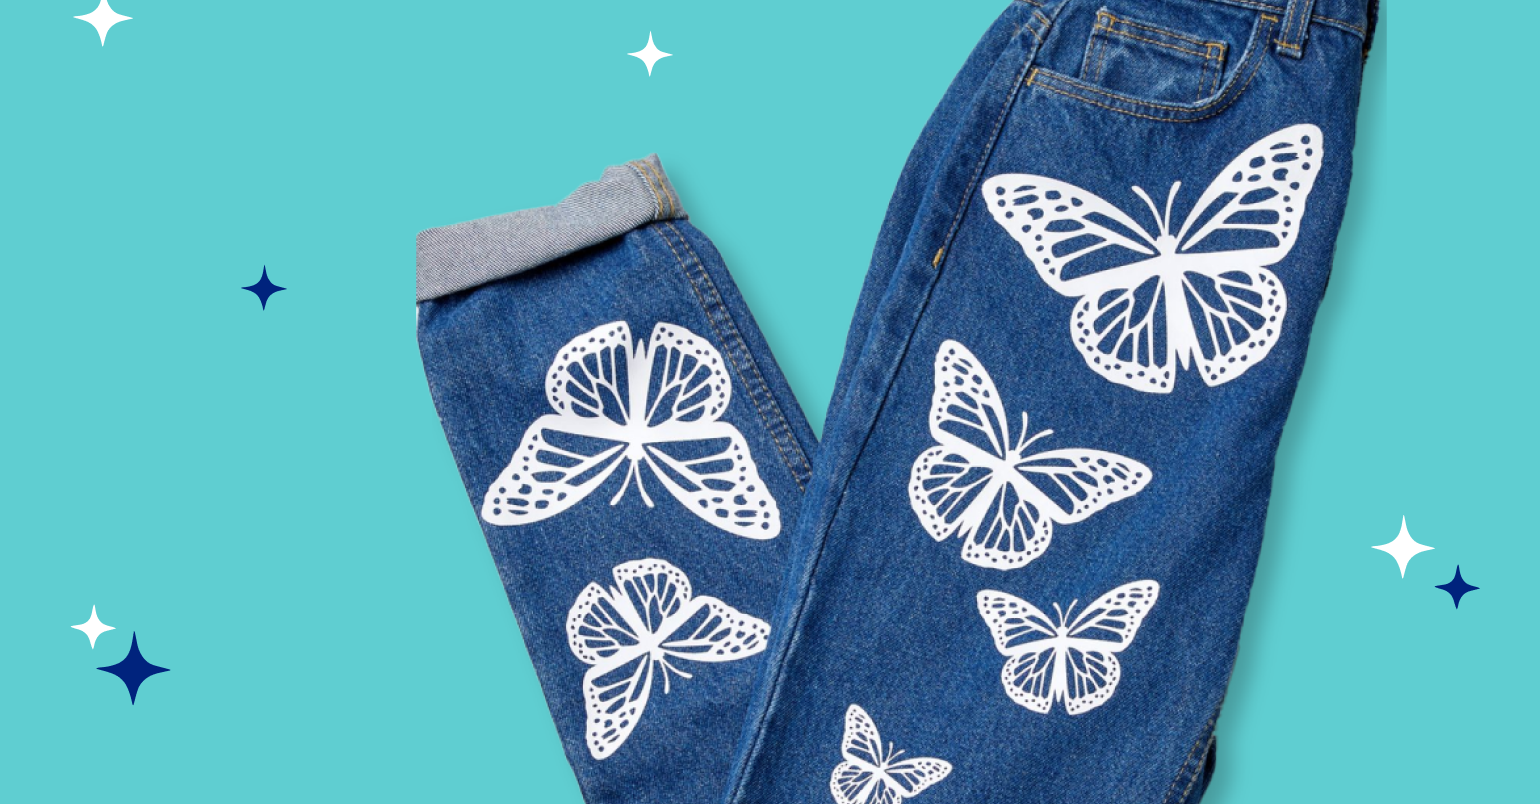 Jeans embellished with iron-on butterflies in white.